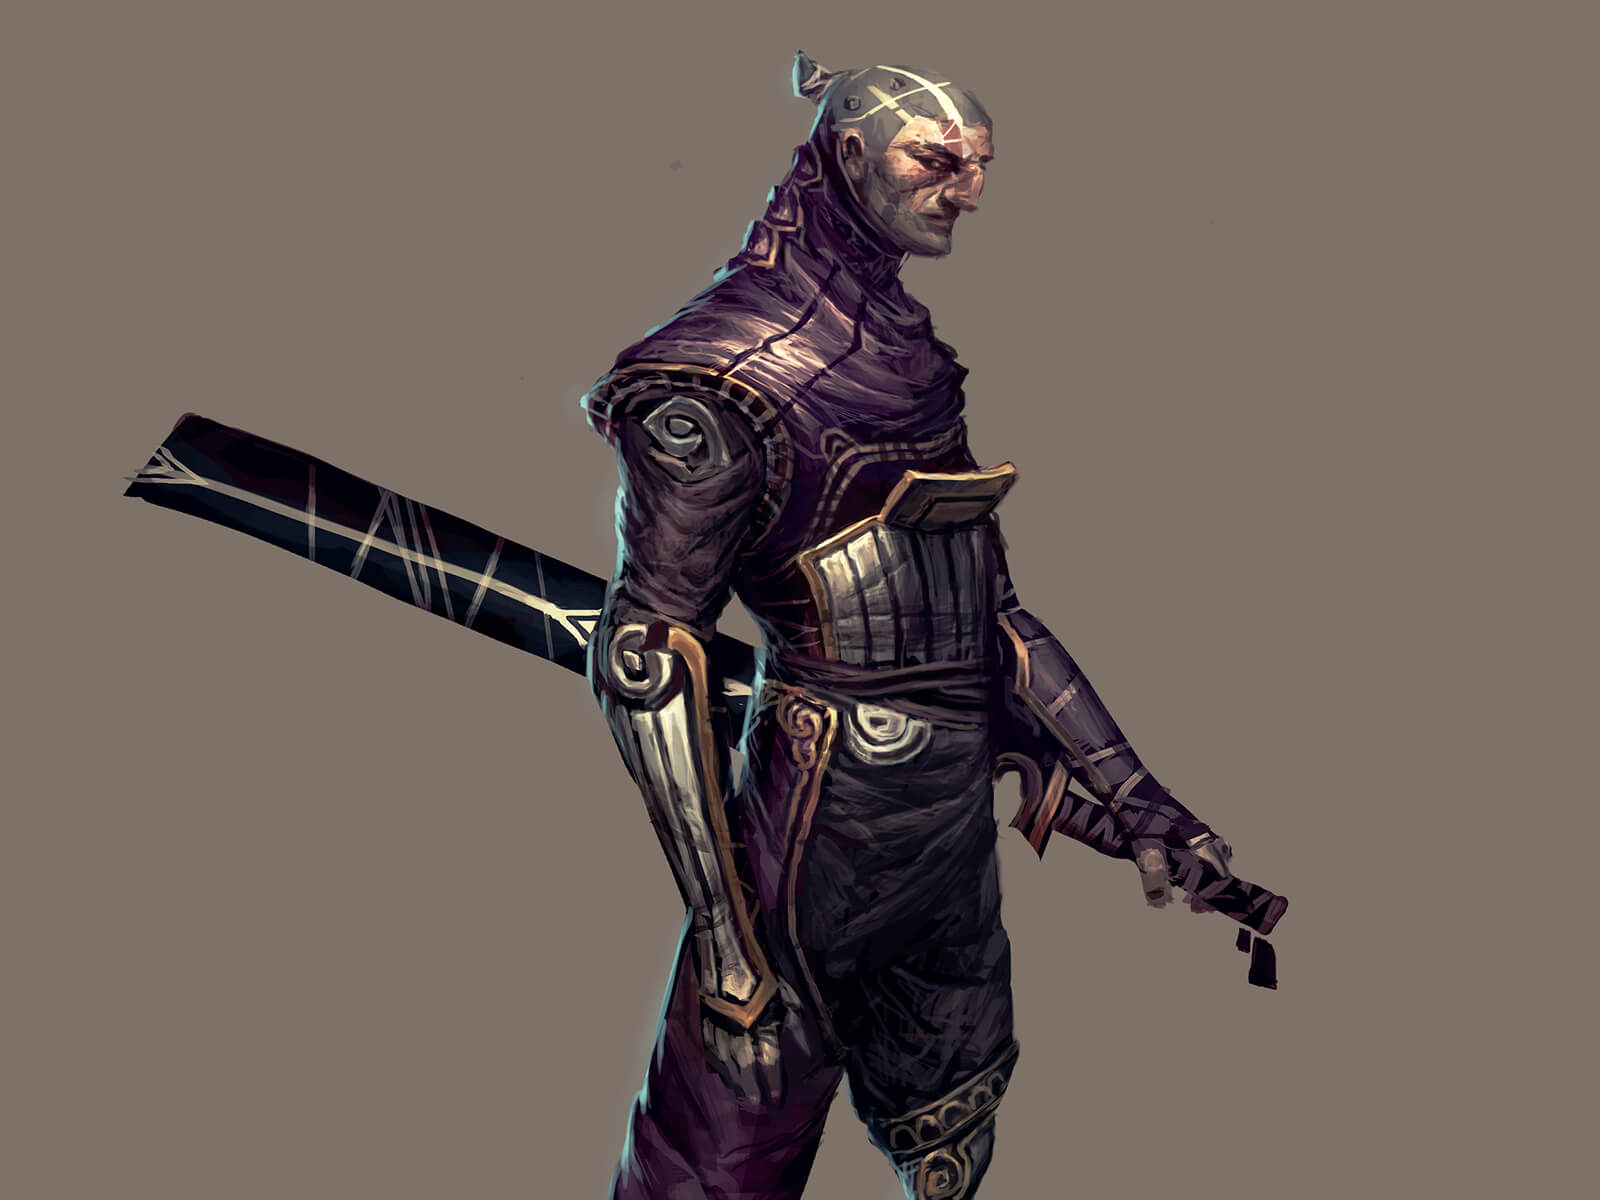 A stern warrior in an ornate, purple and silver uniform seen from the side with a sheathed sword at his hip.